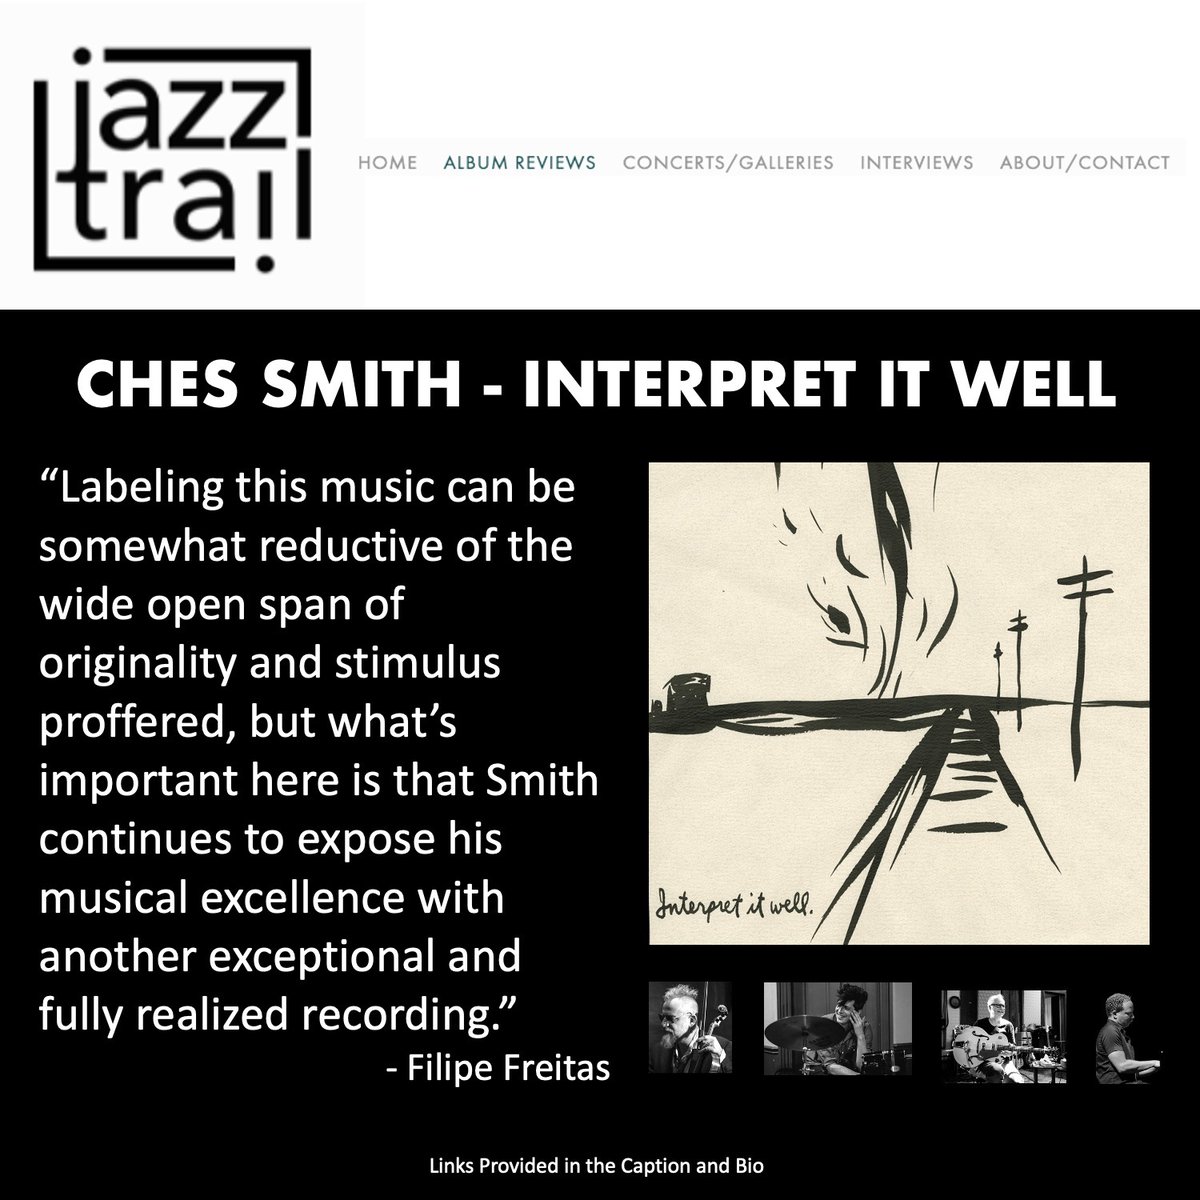 “...Smith continues to expose his musical excellence with another exceptional and fully realized recording.” Filipe Freitas @jazztrail_net jazztrail.net/blog/ches-smit… #ChesSmith #CraigTaborn #MatManeri #BillFrisell #RaymondPettibon